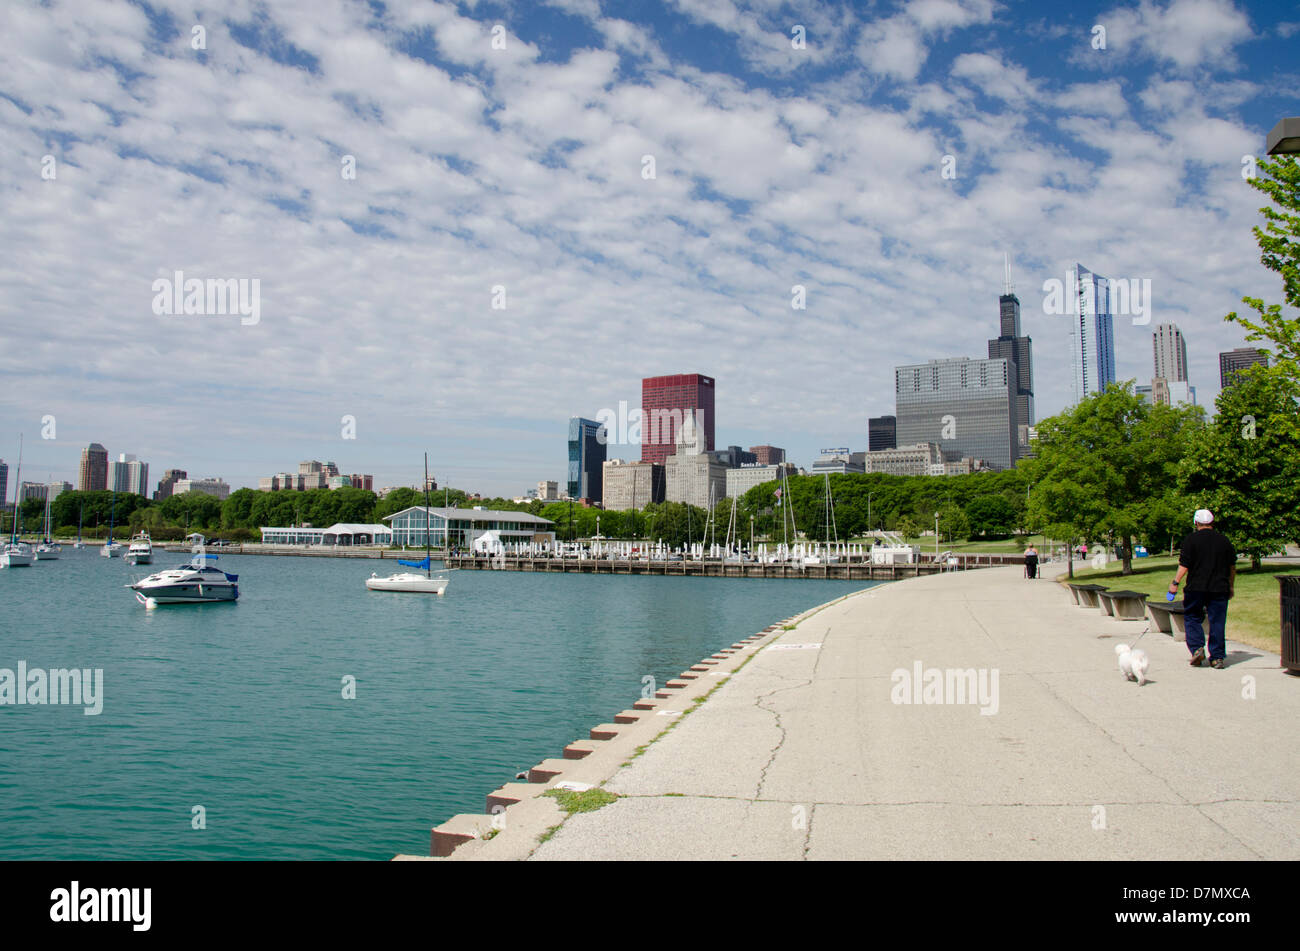 Illinois, Chicago. Downtown city skyline view from Lake Michigan waterfront. Stock Photo